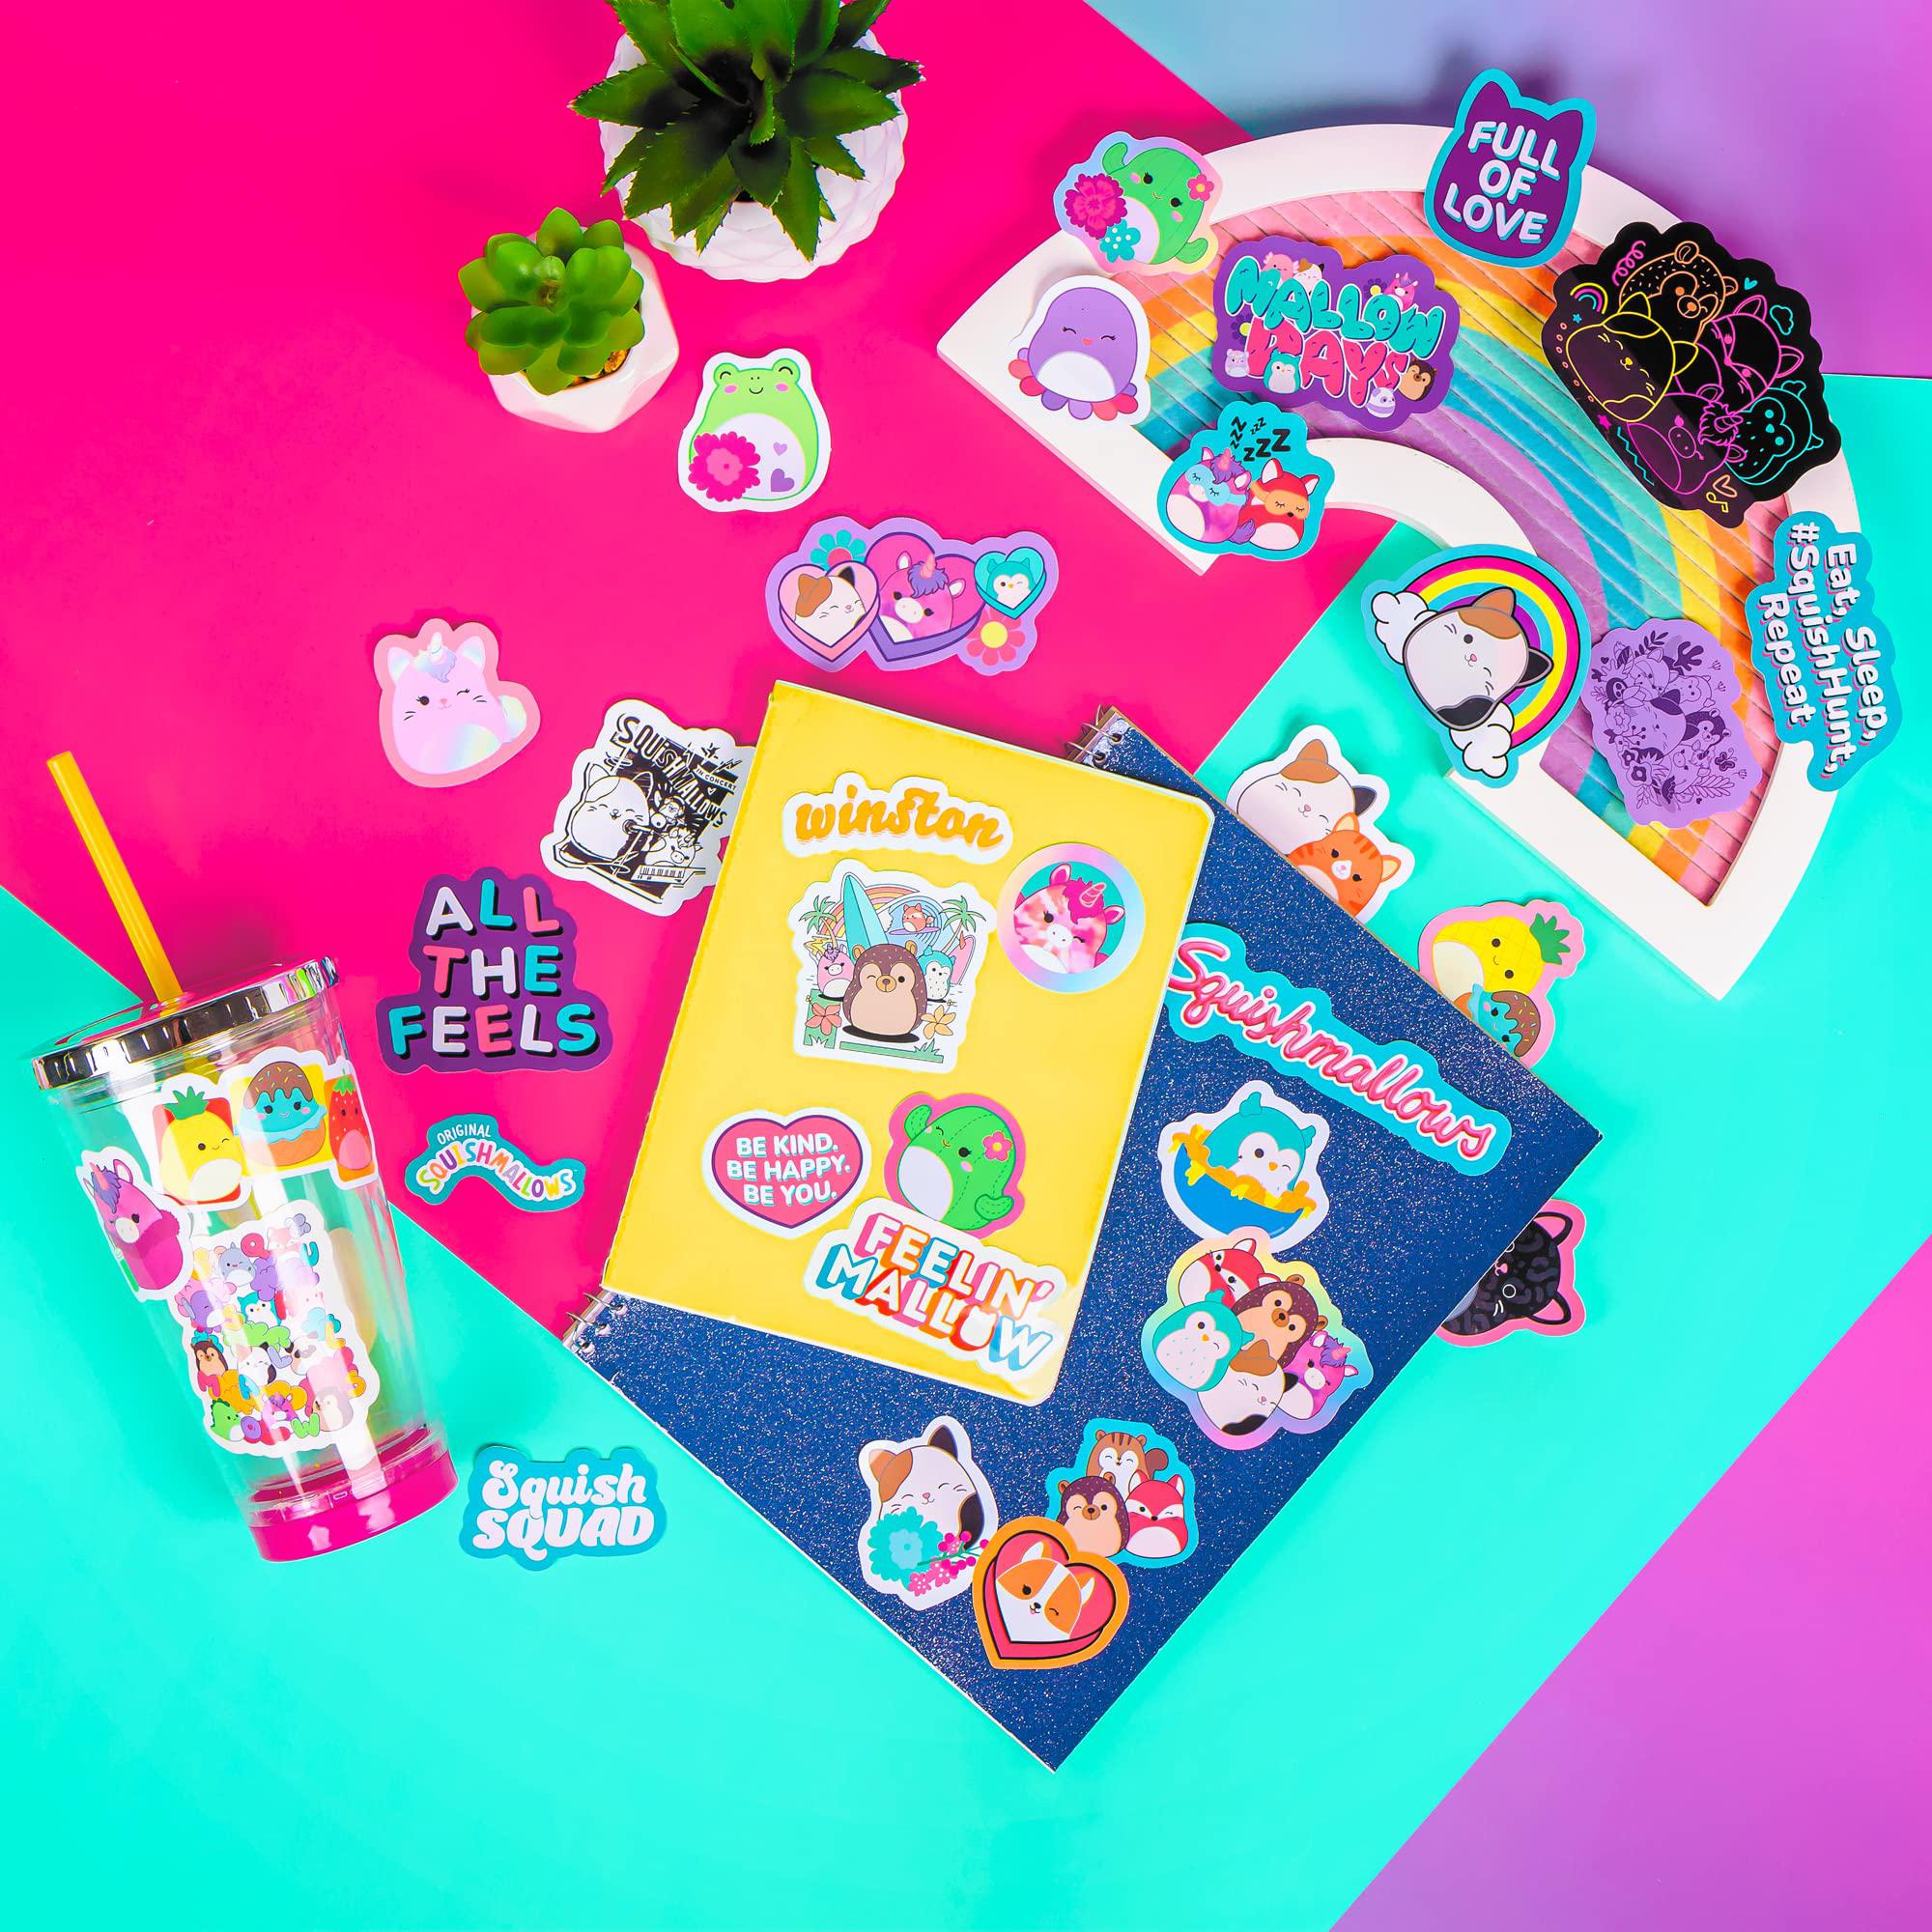 fashion angels squishmallows vinyl sticker pack - includes 100 large squishmallows stickers - water resistant stickers - join